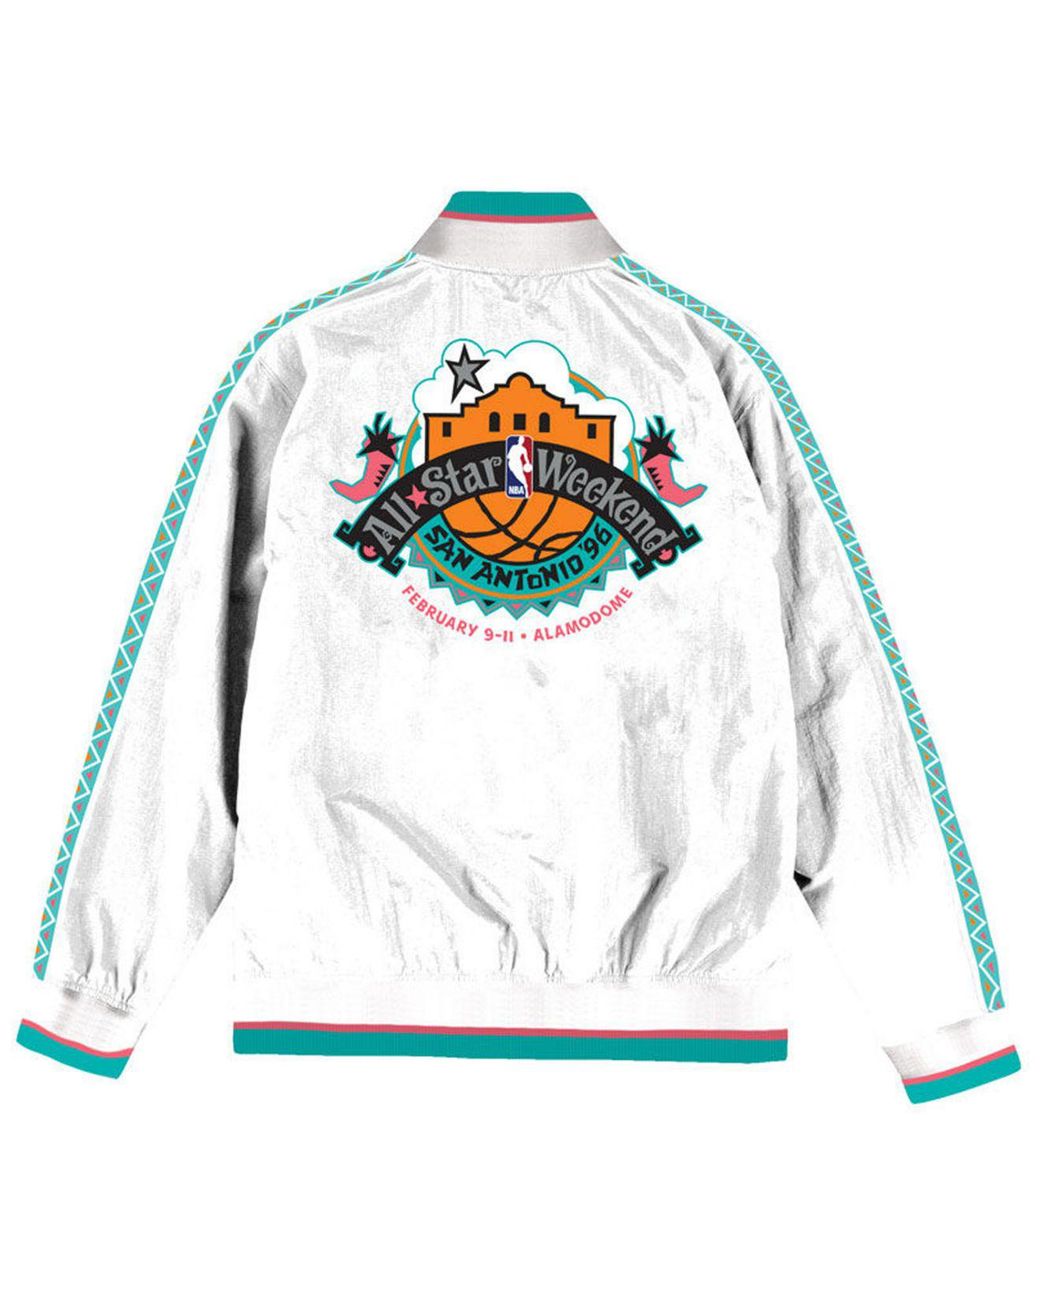 Mitchell & Ness Nba All Star 1996 Warm Up Jacket in White for Men